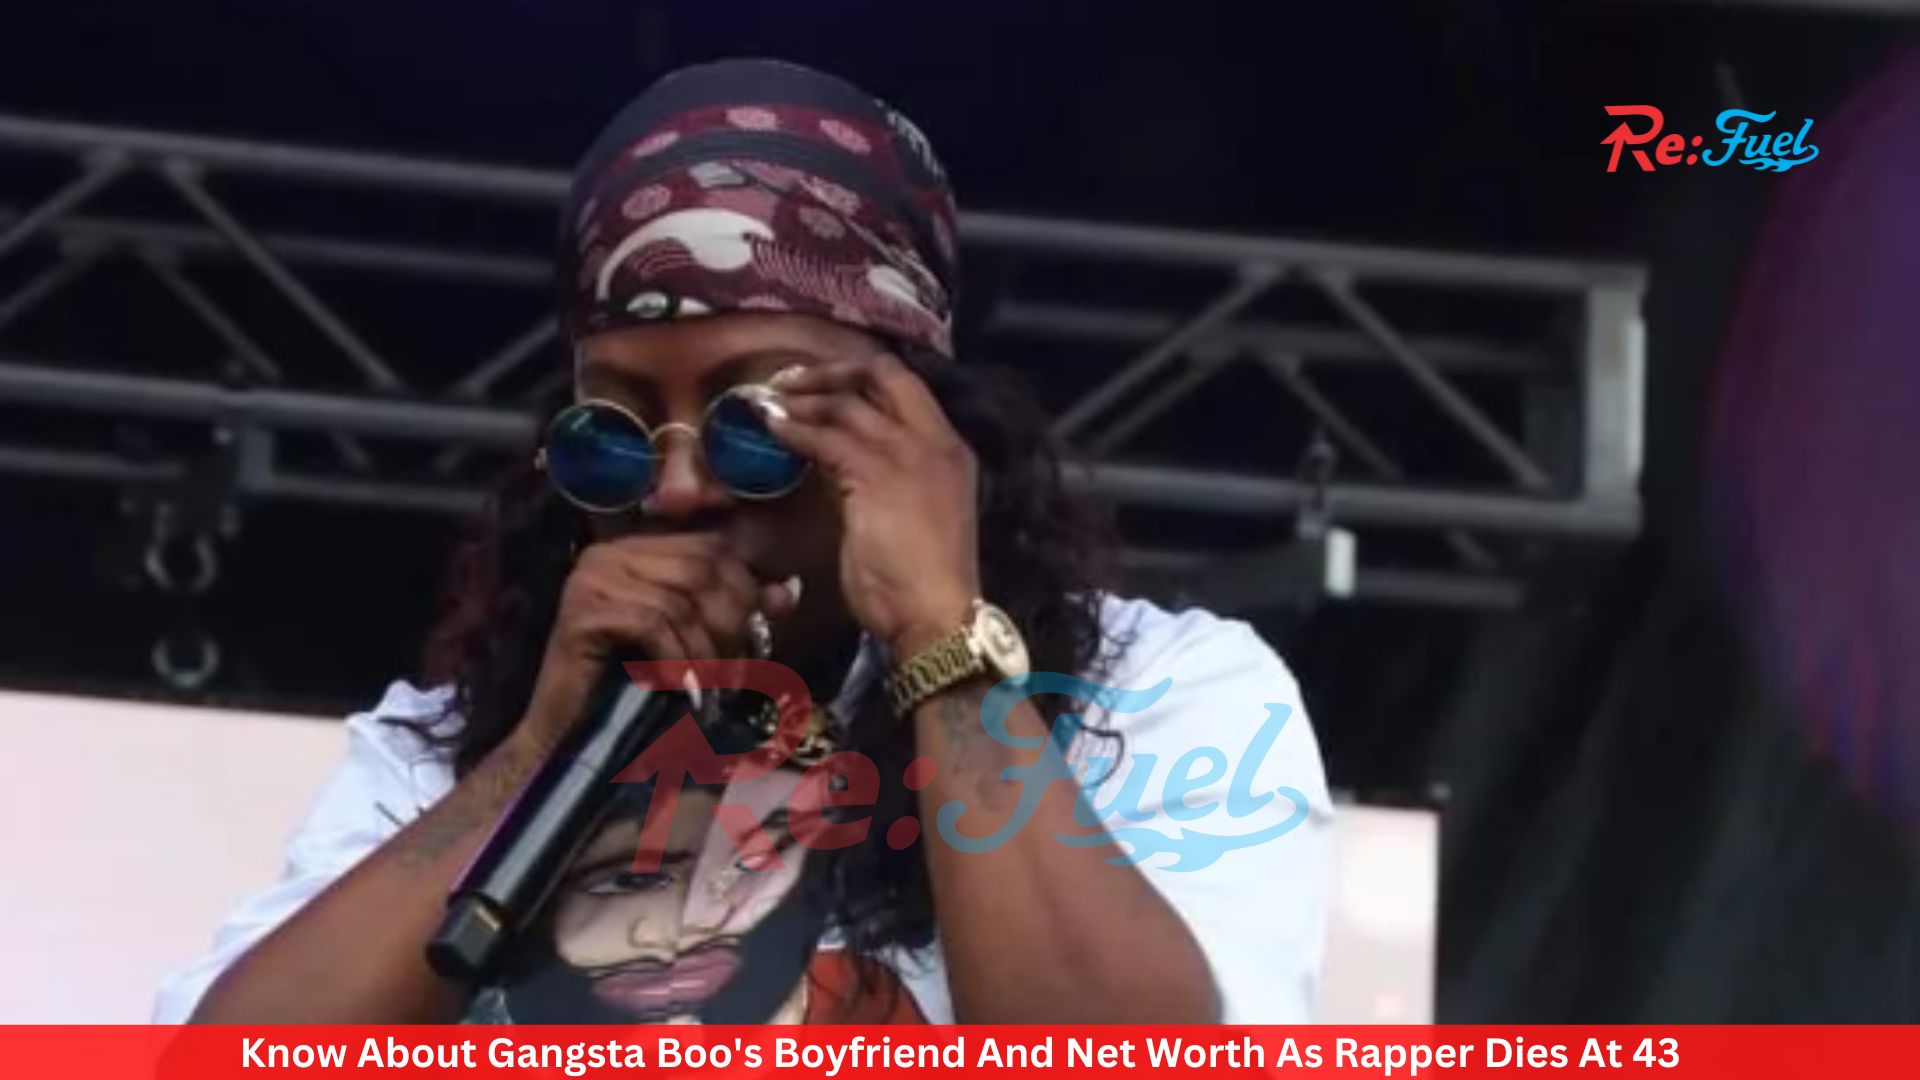 Know About Gangsta Boo's Boyfriend And Net Worth As Rapper Dies At 43